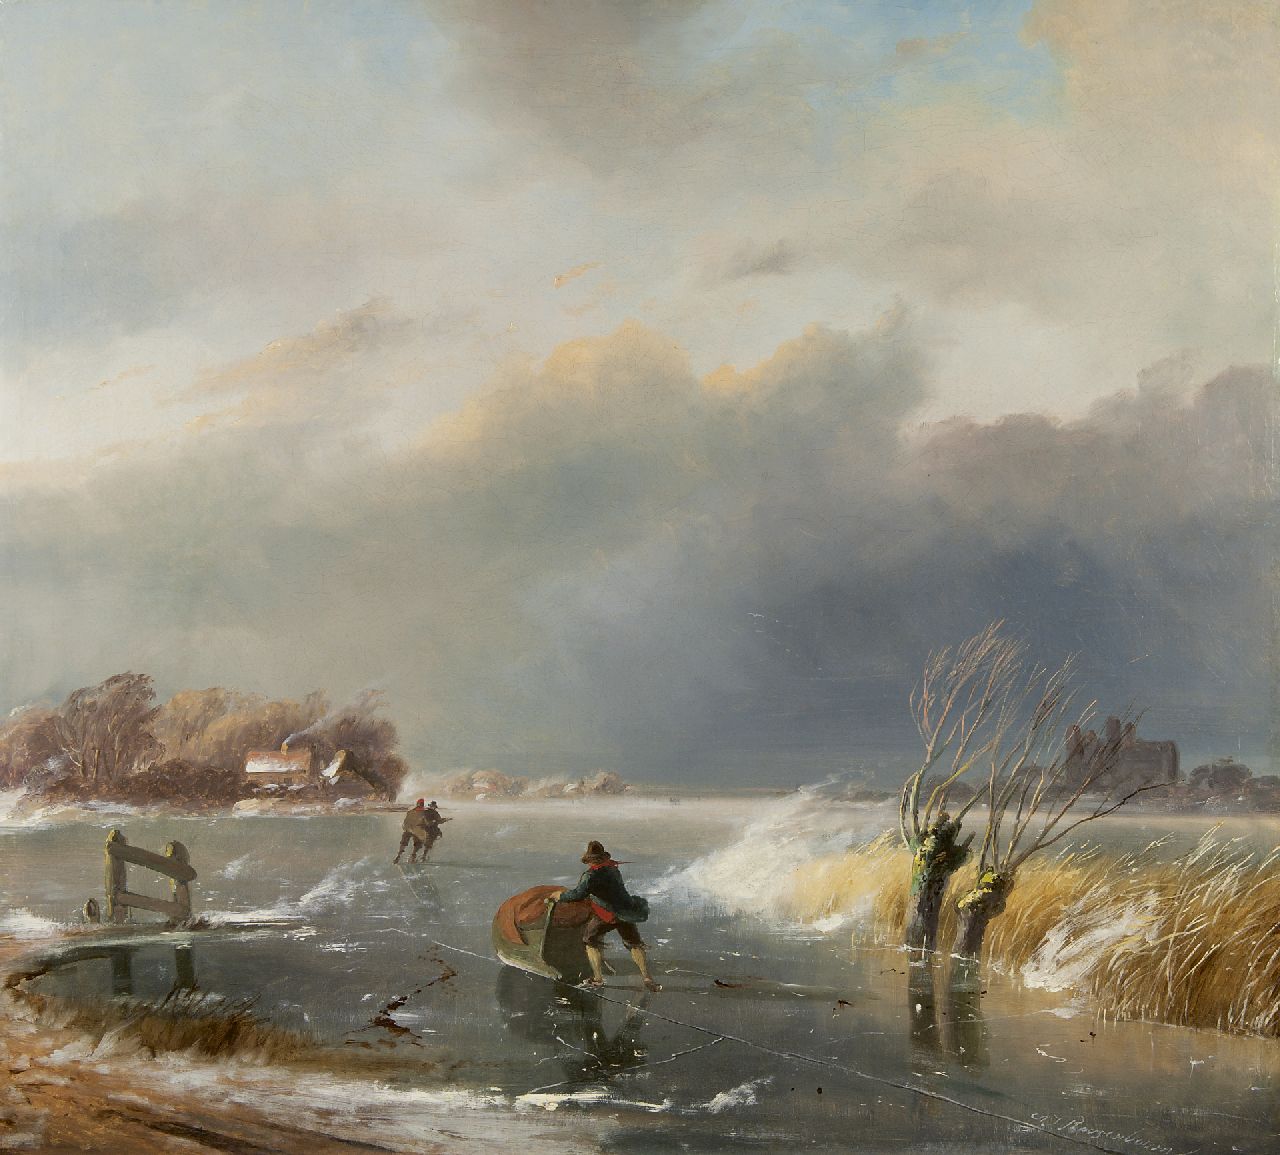 Roosenboom N.J.  | Nicolaas Johannes Roosenboom, A frozen waterway with skaters, oil on canvas 90.5 x 100.0 cm, signed l.r.